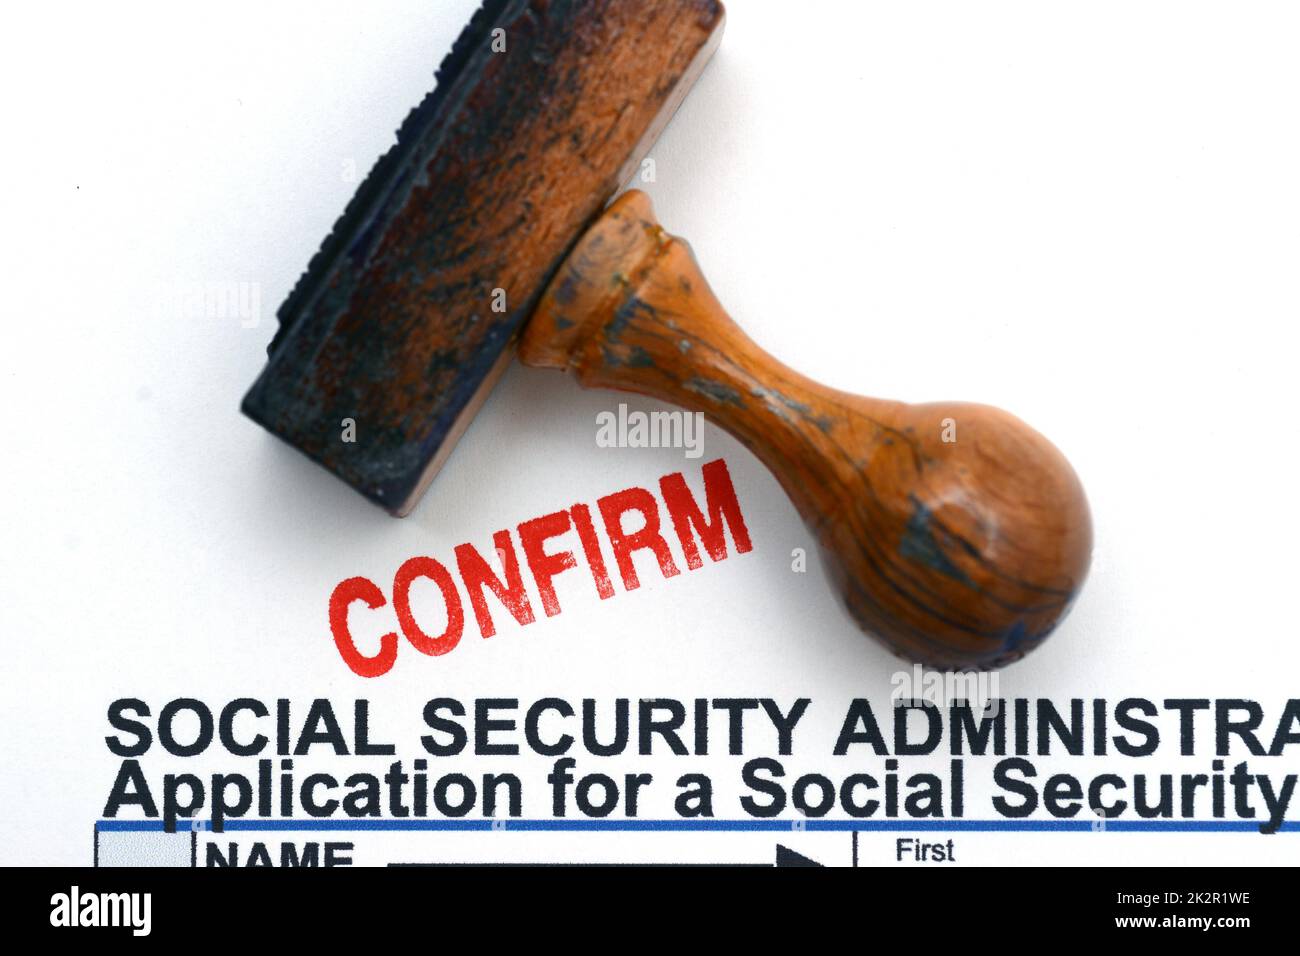 Social security form Stock Photo